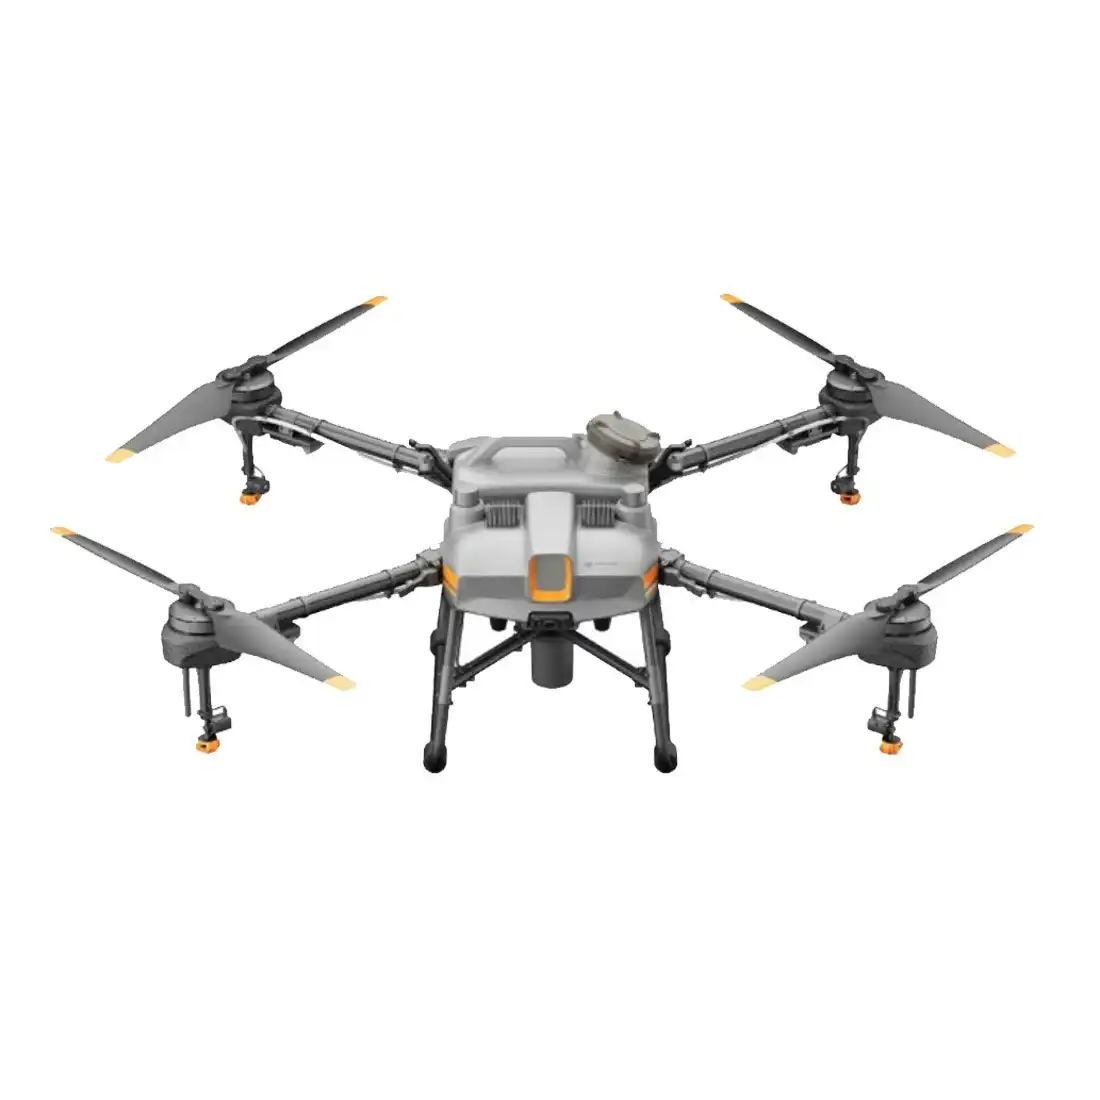 Dji AGRAS T10 Ready To Fly (3xBattery, Battery Station, Charging Cable)